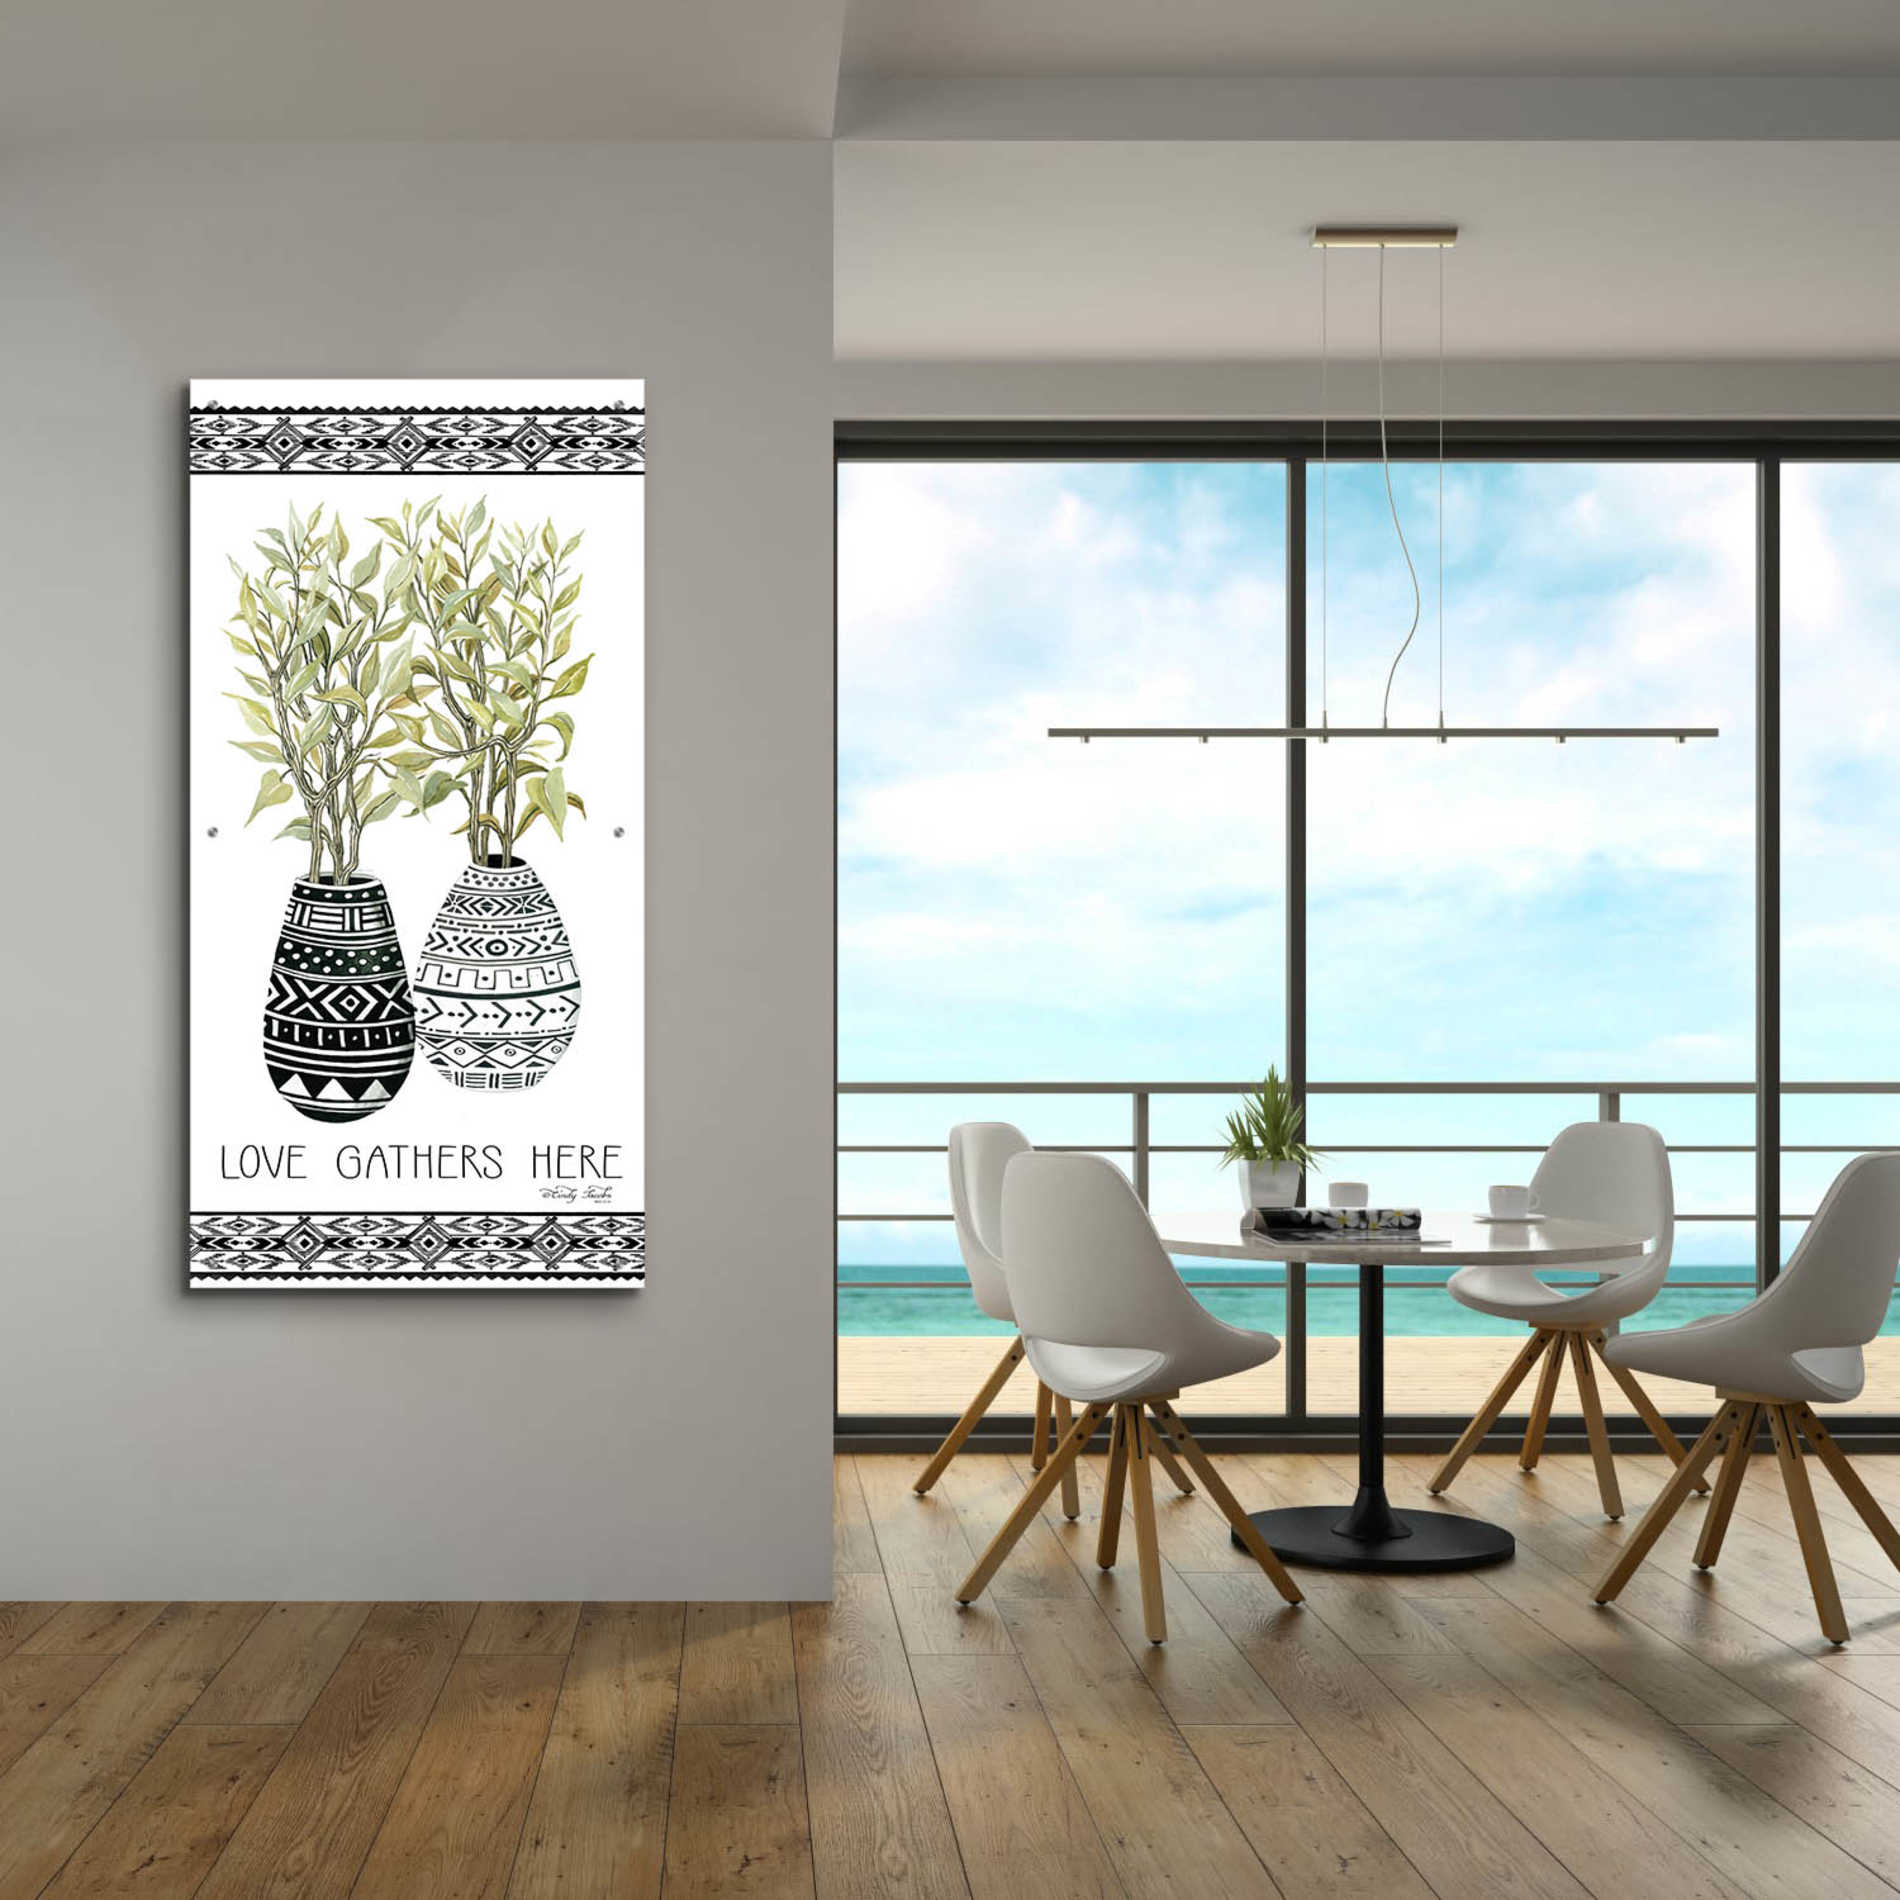 Epic Art 'Love Gathers Here Mud Cloth Vase' by Cindy Jacobs, Acrylic Glass Wall Art,24x48